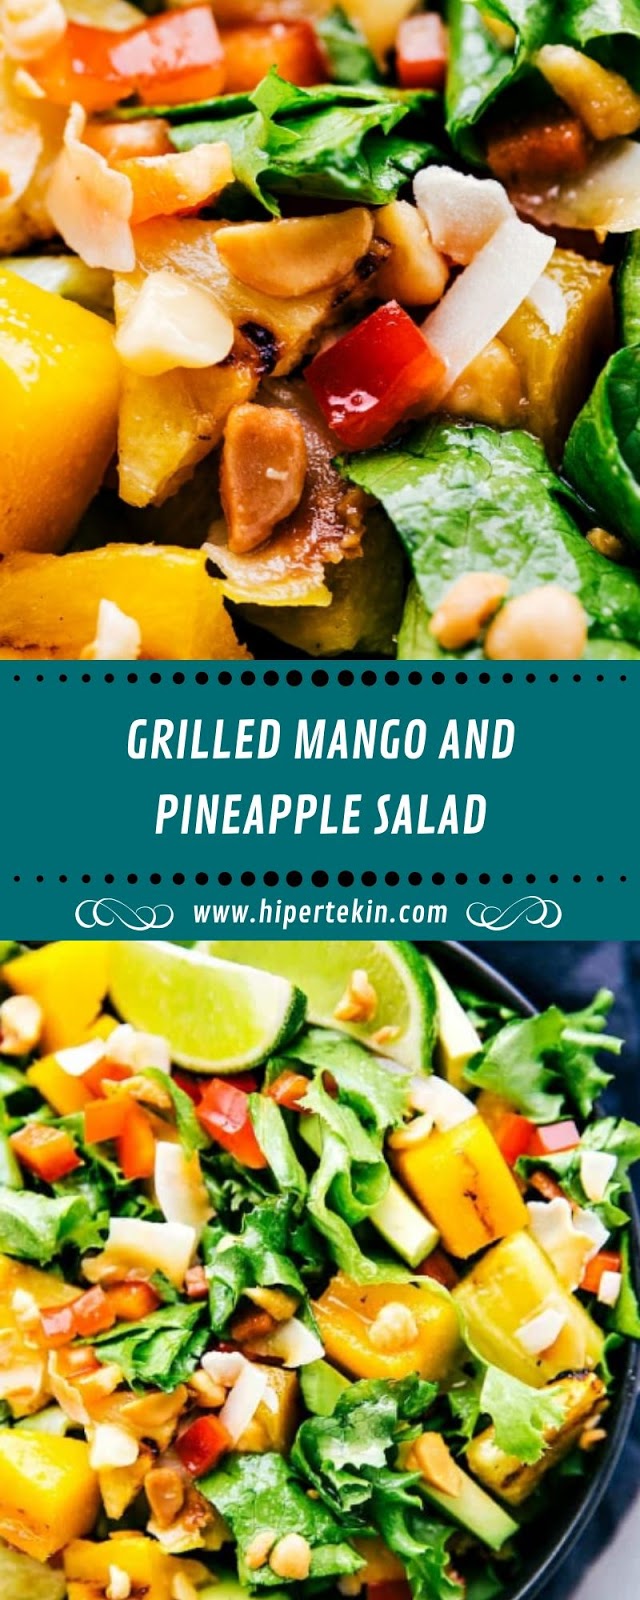 GRILLED MANGO AND PINEAPPLE SALAD